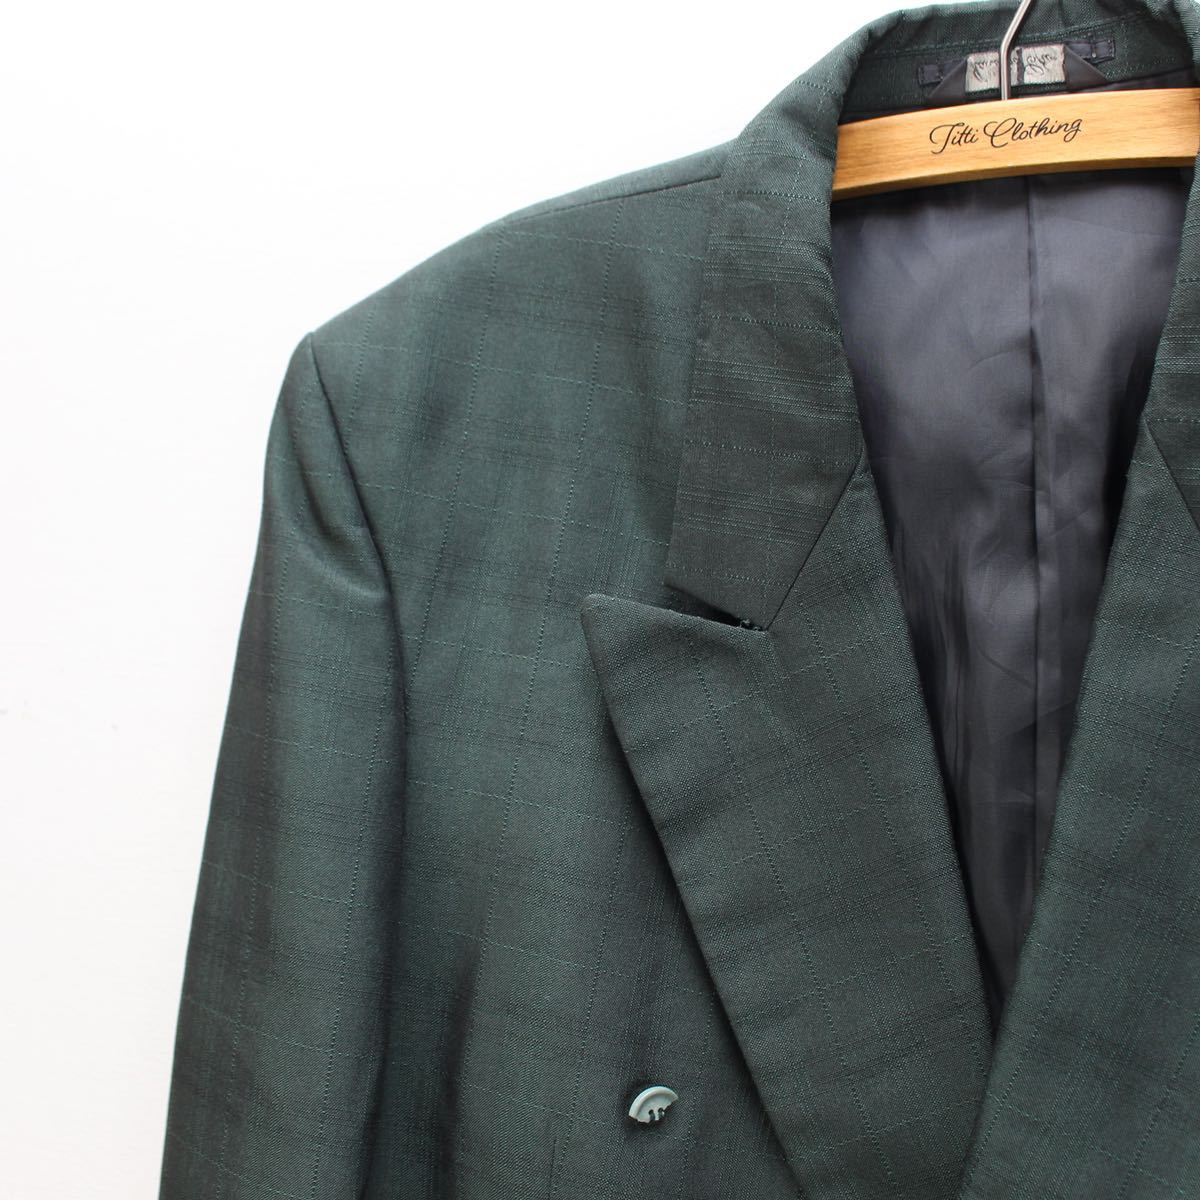 USA VINTAGE CHECK PATTERNED GREEN COLOR DOUBLE TAILORED  JACKET/アメリカ古着グリーンカラーダブルテーラードジャケット